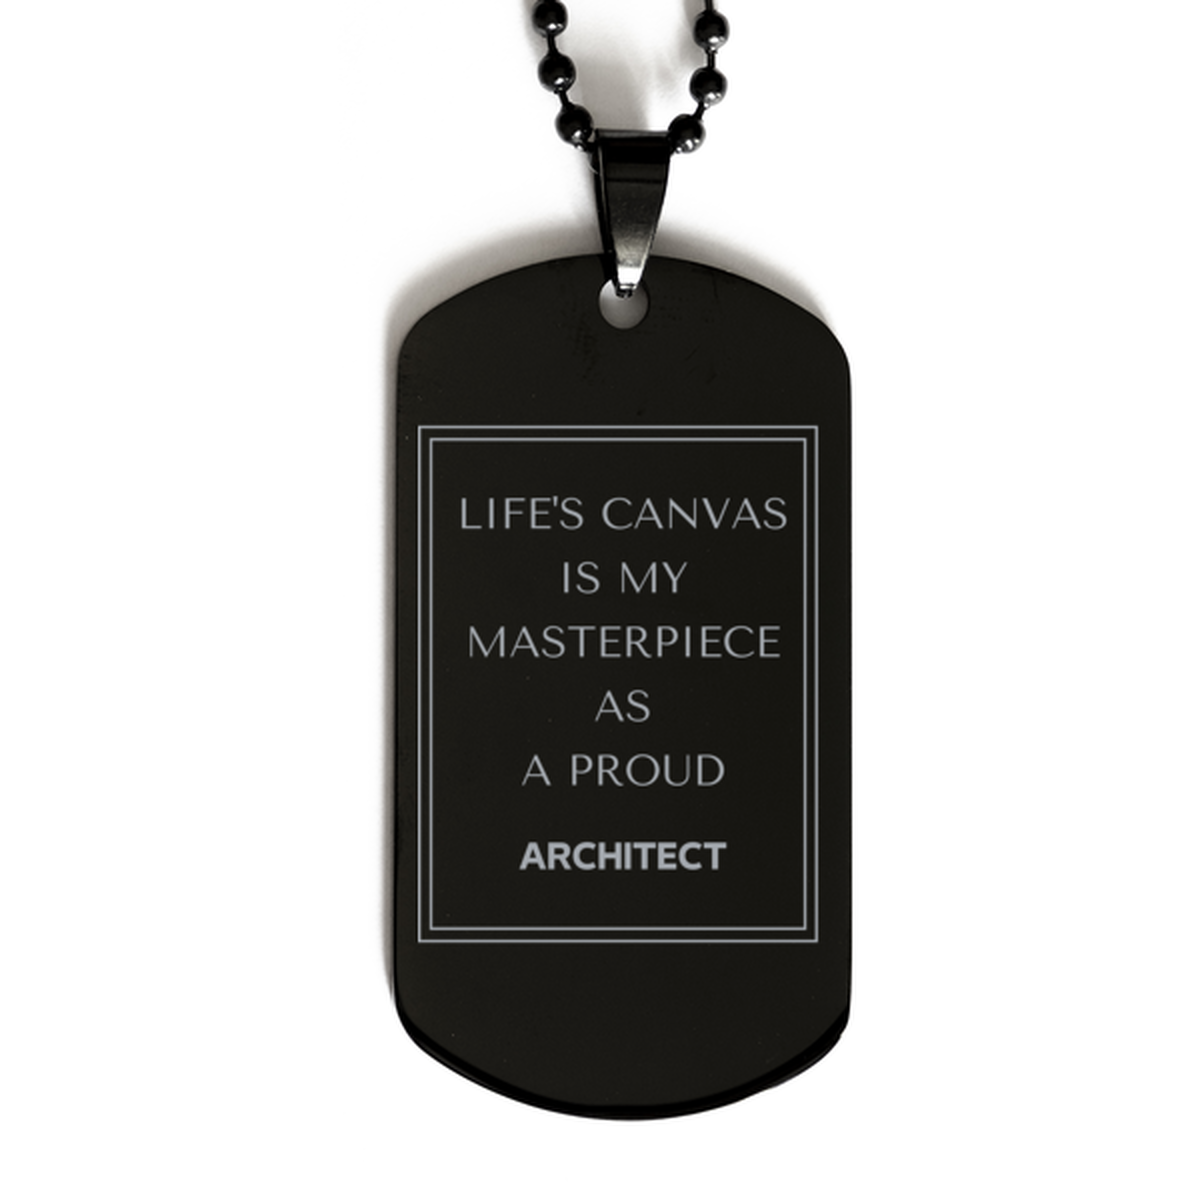 Proud Architect Gifts, Life's canvas is my masterpiece, Epic Birthday Christmas Unique Black Dog Tag For Architect, Coworkers, Men, Women, Friends